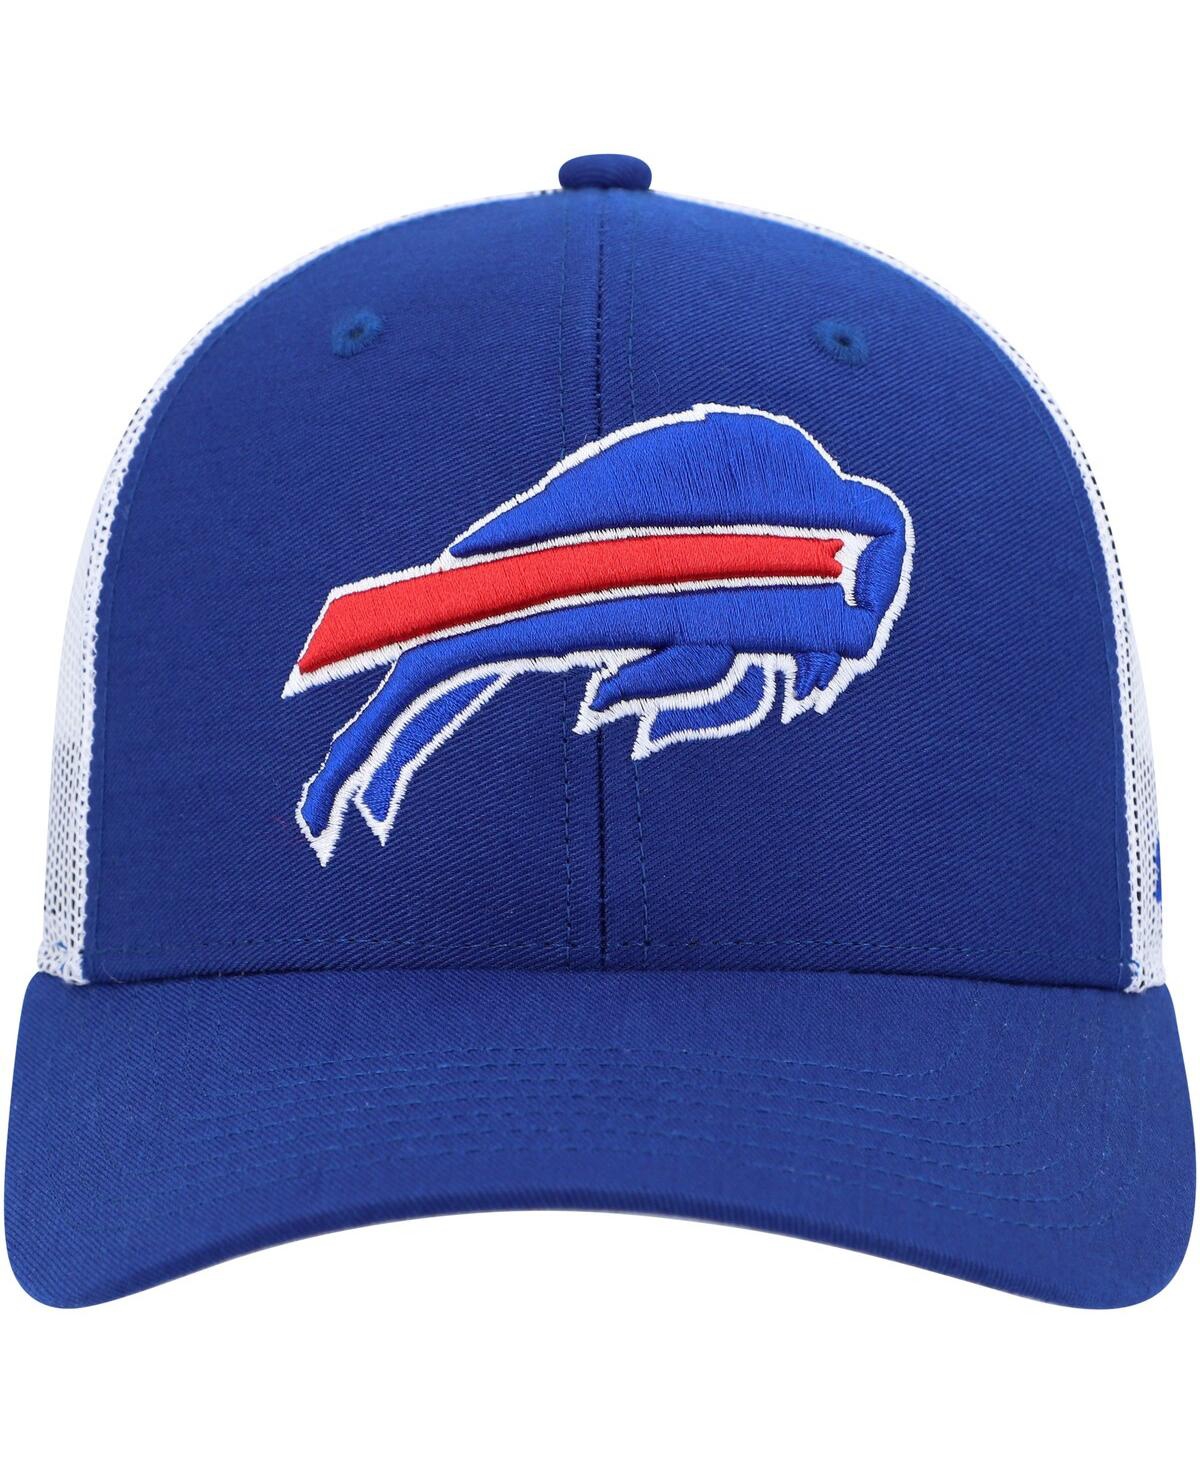 Shop 47 Brand Youth Boys And Girls ' Royal, White Buffalo Bills Adjustable Trucker Hat In Royal,white